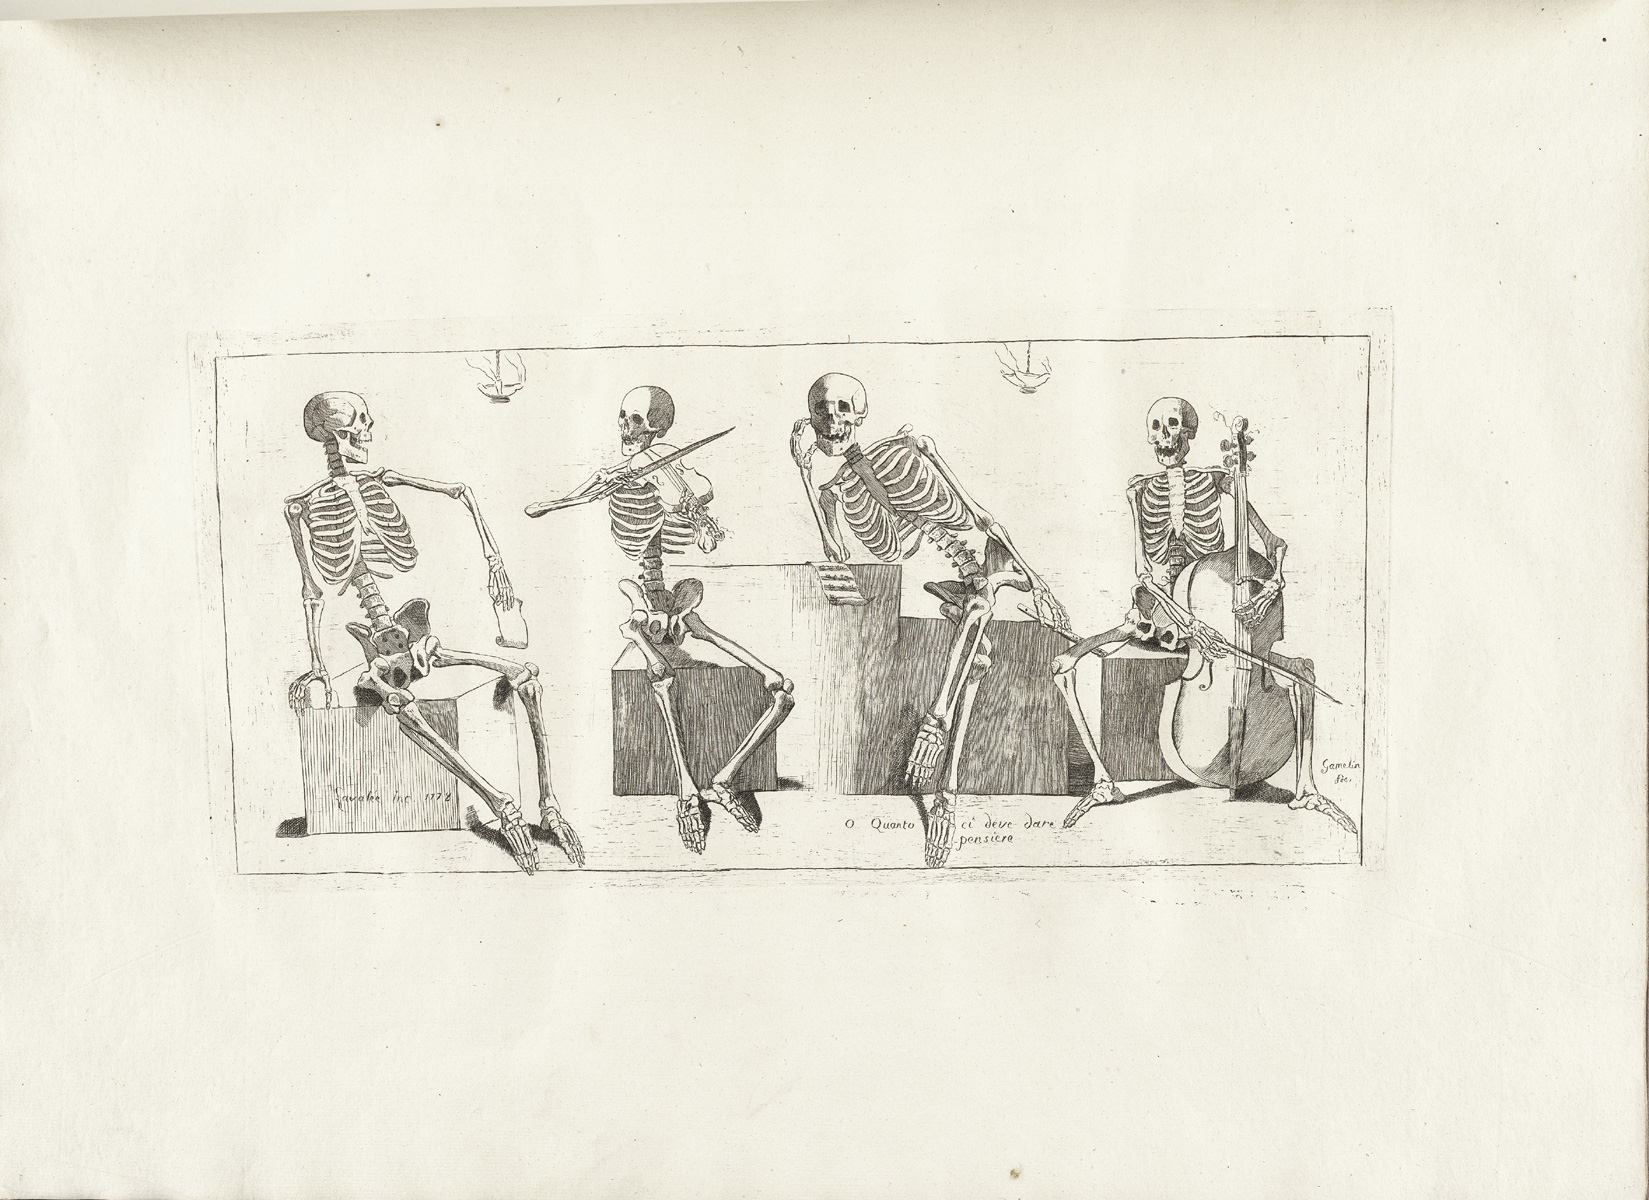 Engraving of four seated skeletons, the one on the far right playing a cello, just to his right the skeleton holds a flute but is not playing as he leans on his right elbow; at the far left the skeleton views the others playing, and just to his right a skeleton plays the violin; from Jacques Gamelin’s Nouveau recueil d’osteologie et de myologie, NLM Call no.: WZ 260 G178m 1779.